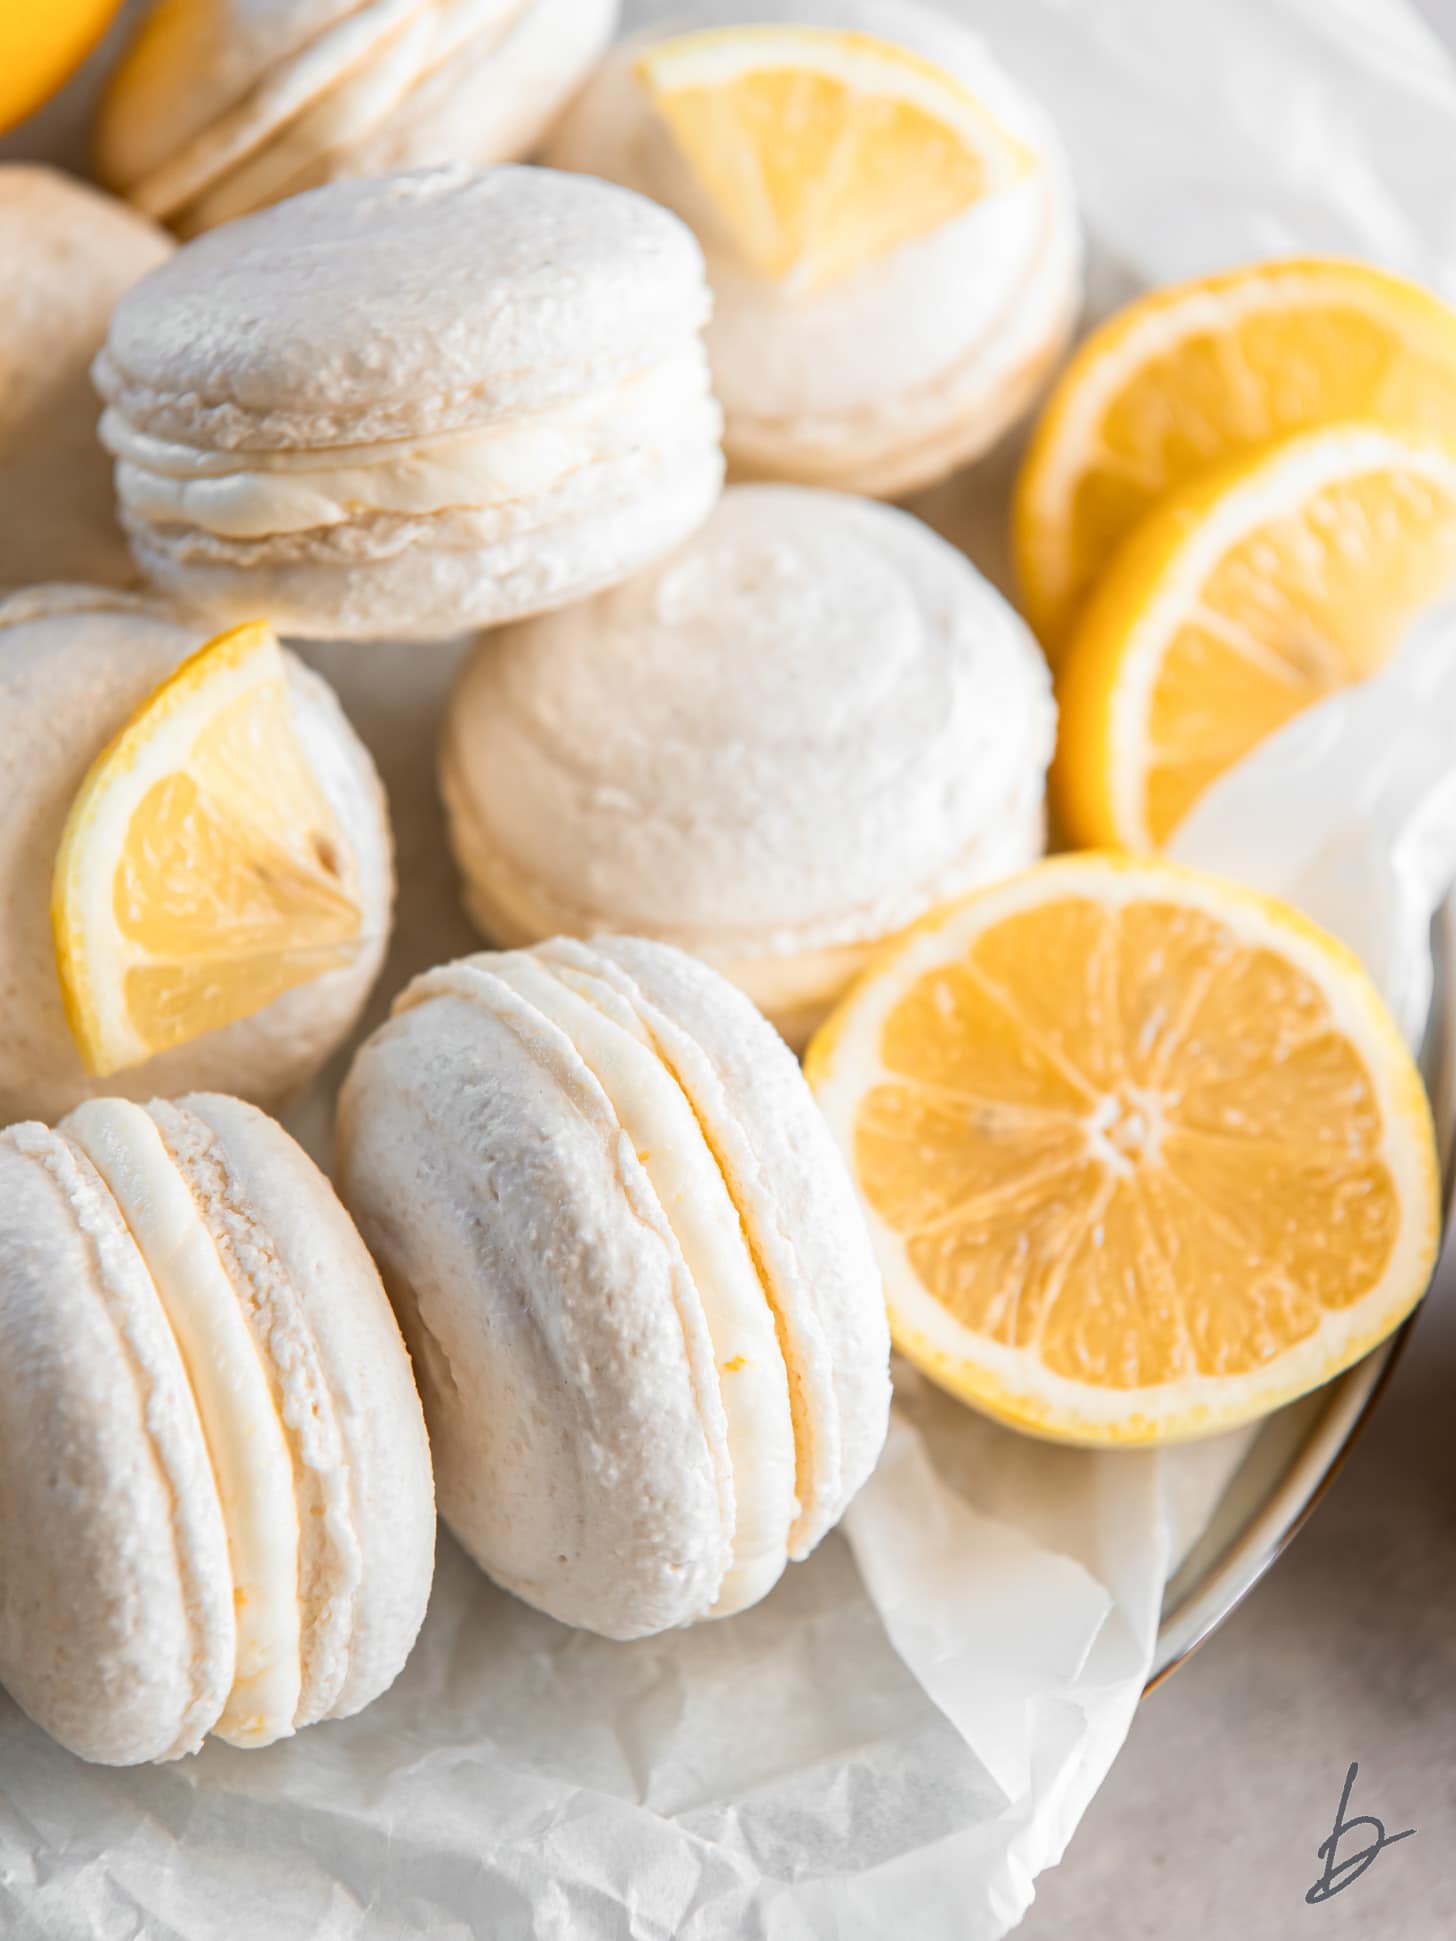 plate with macarons and lemon slices with one lemon macaron on its side showing lemon buttercream filling.